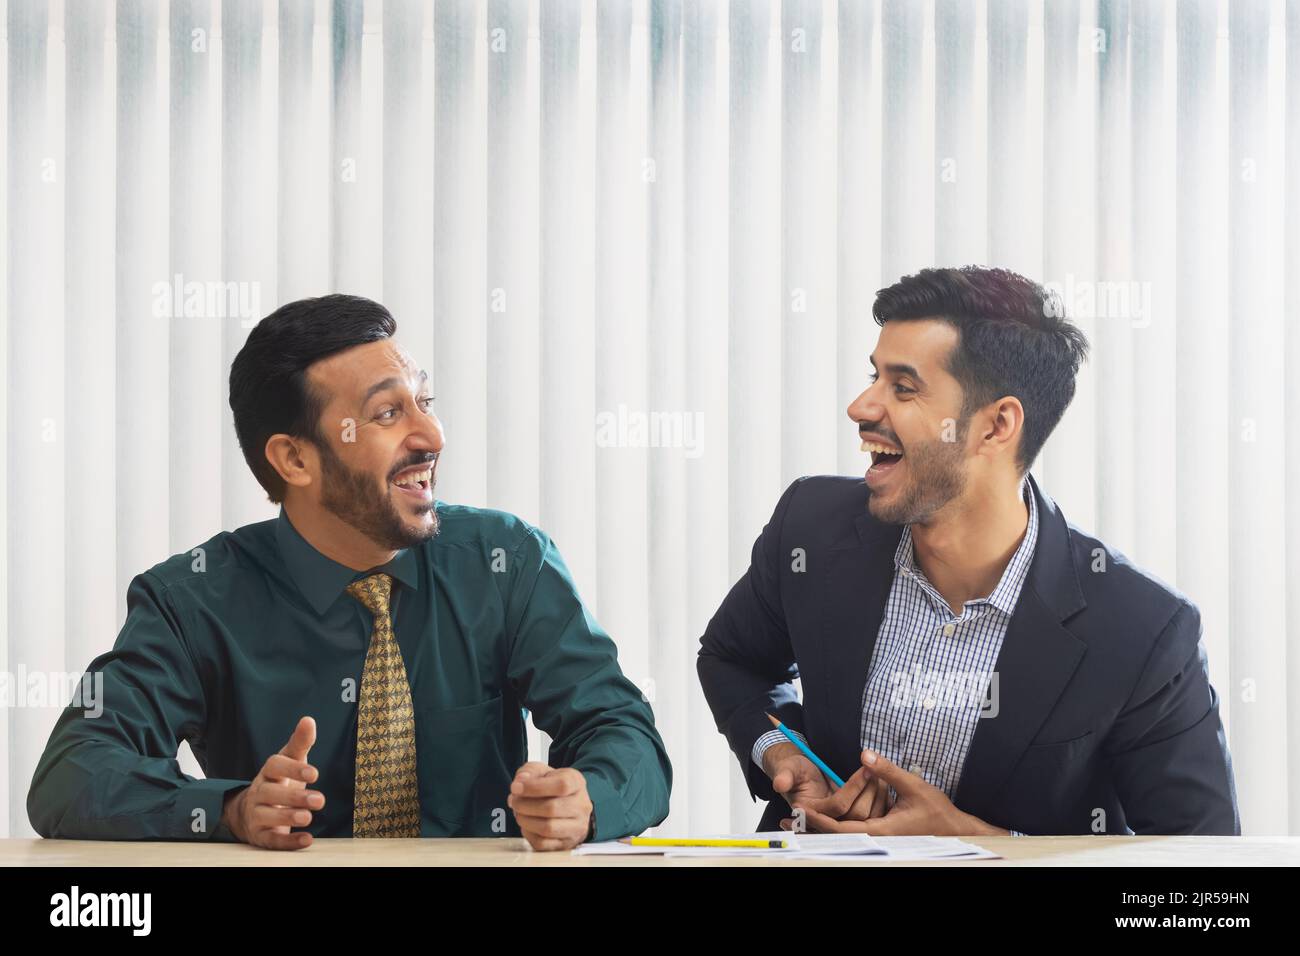 Corporate co-workers talking and laughing while sitting together. Stock Photo